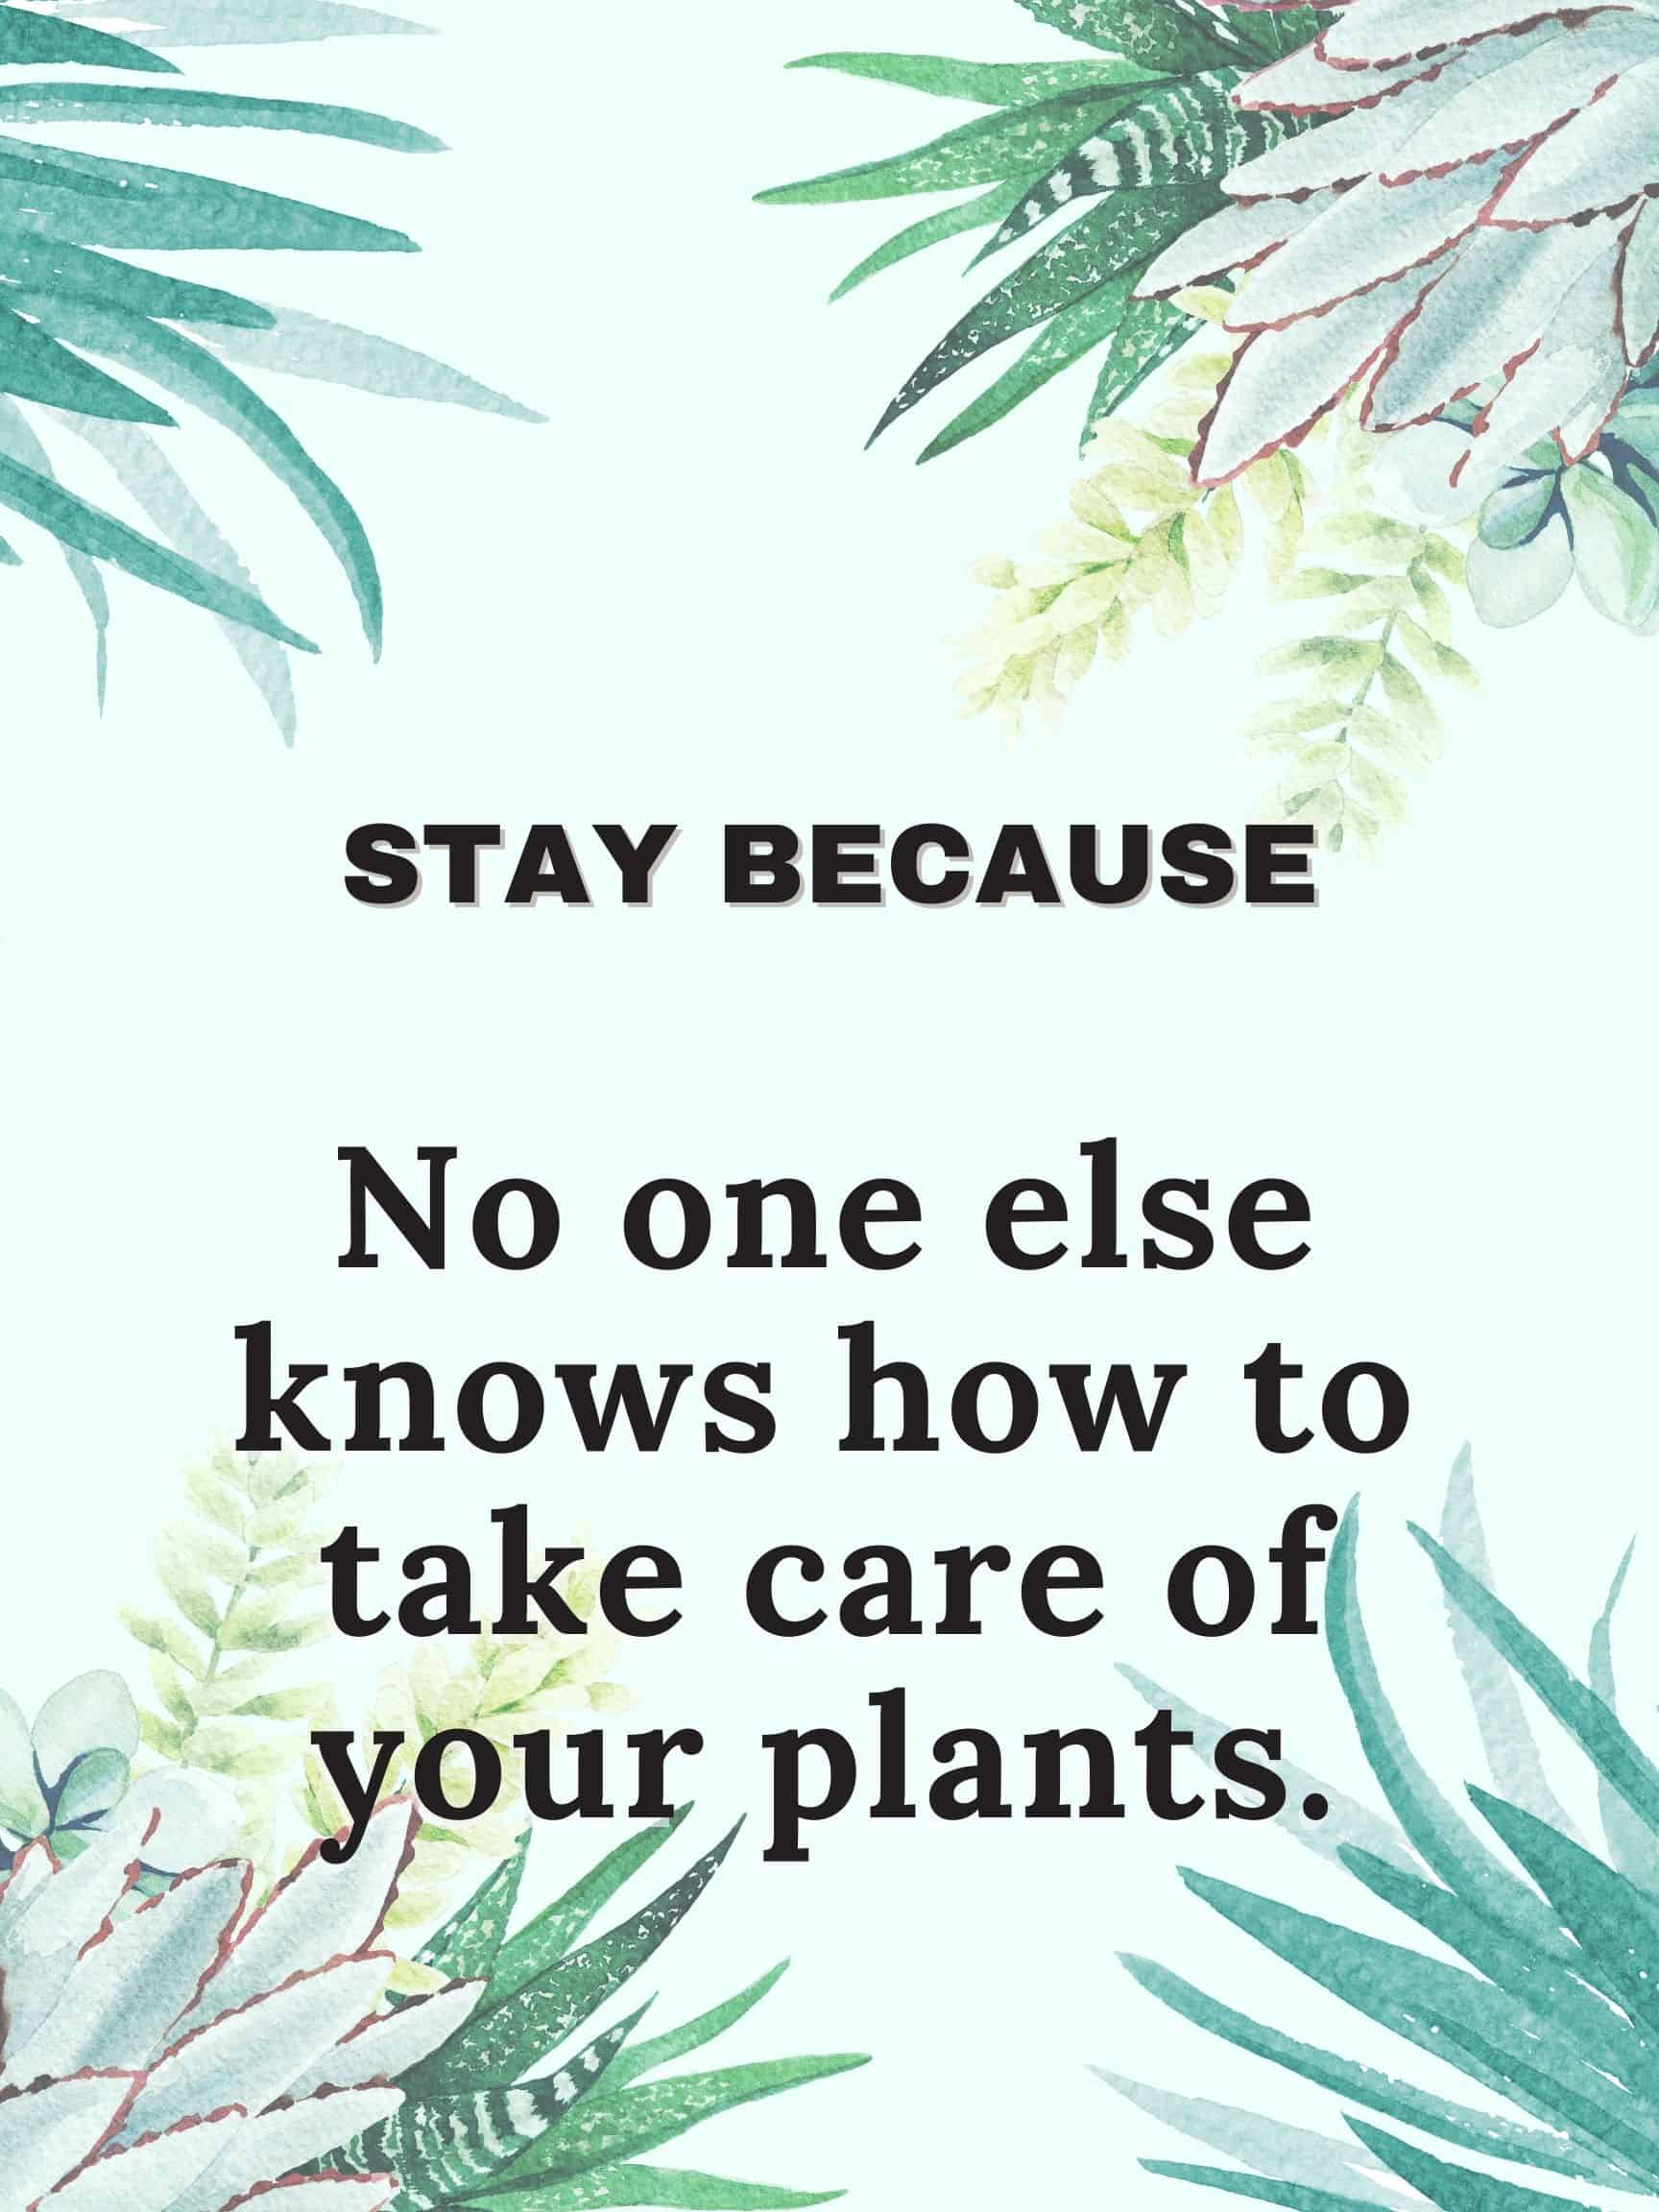 Stay because no one else knows how to take care of your plants. #staybecause